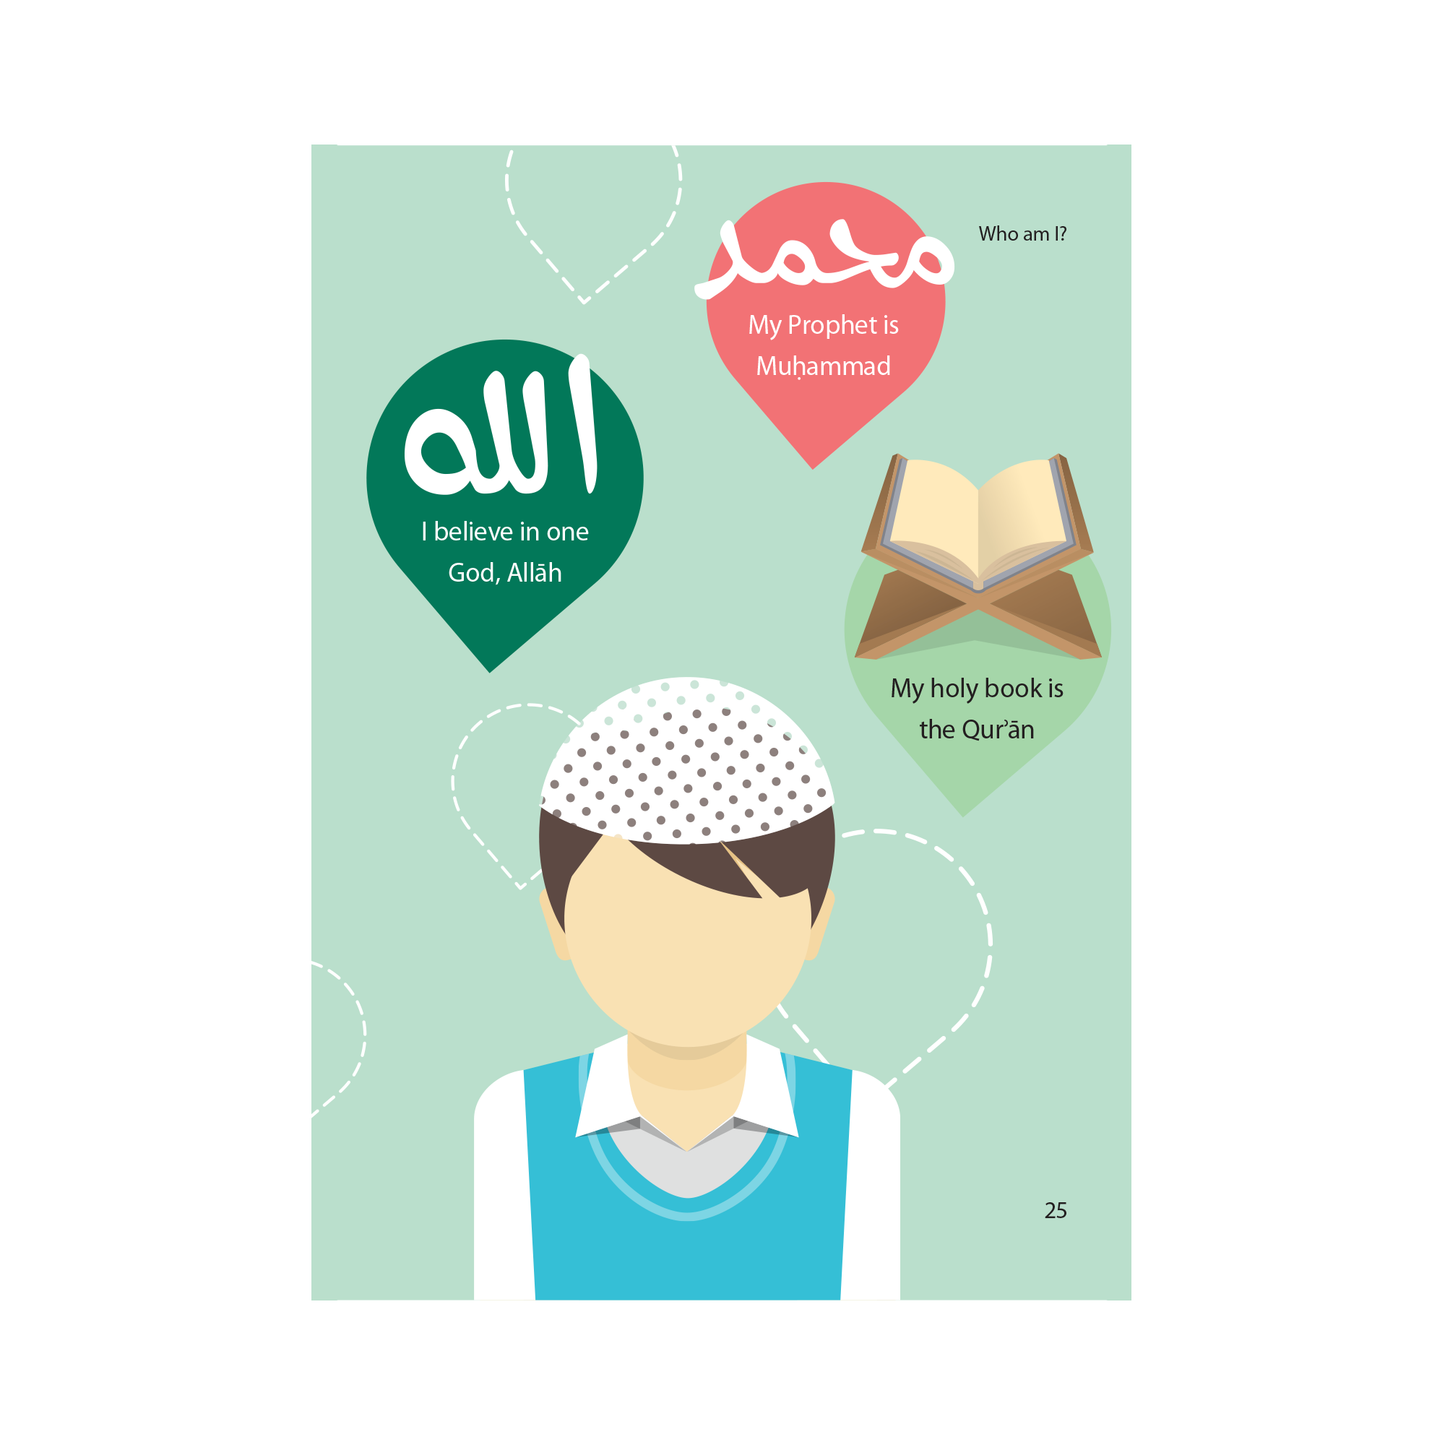 Islamic Studies: Textbook 1 – Learn about Islam Series by Safar